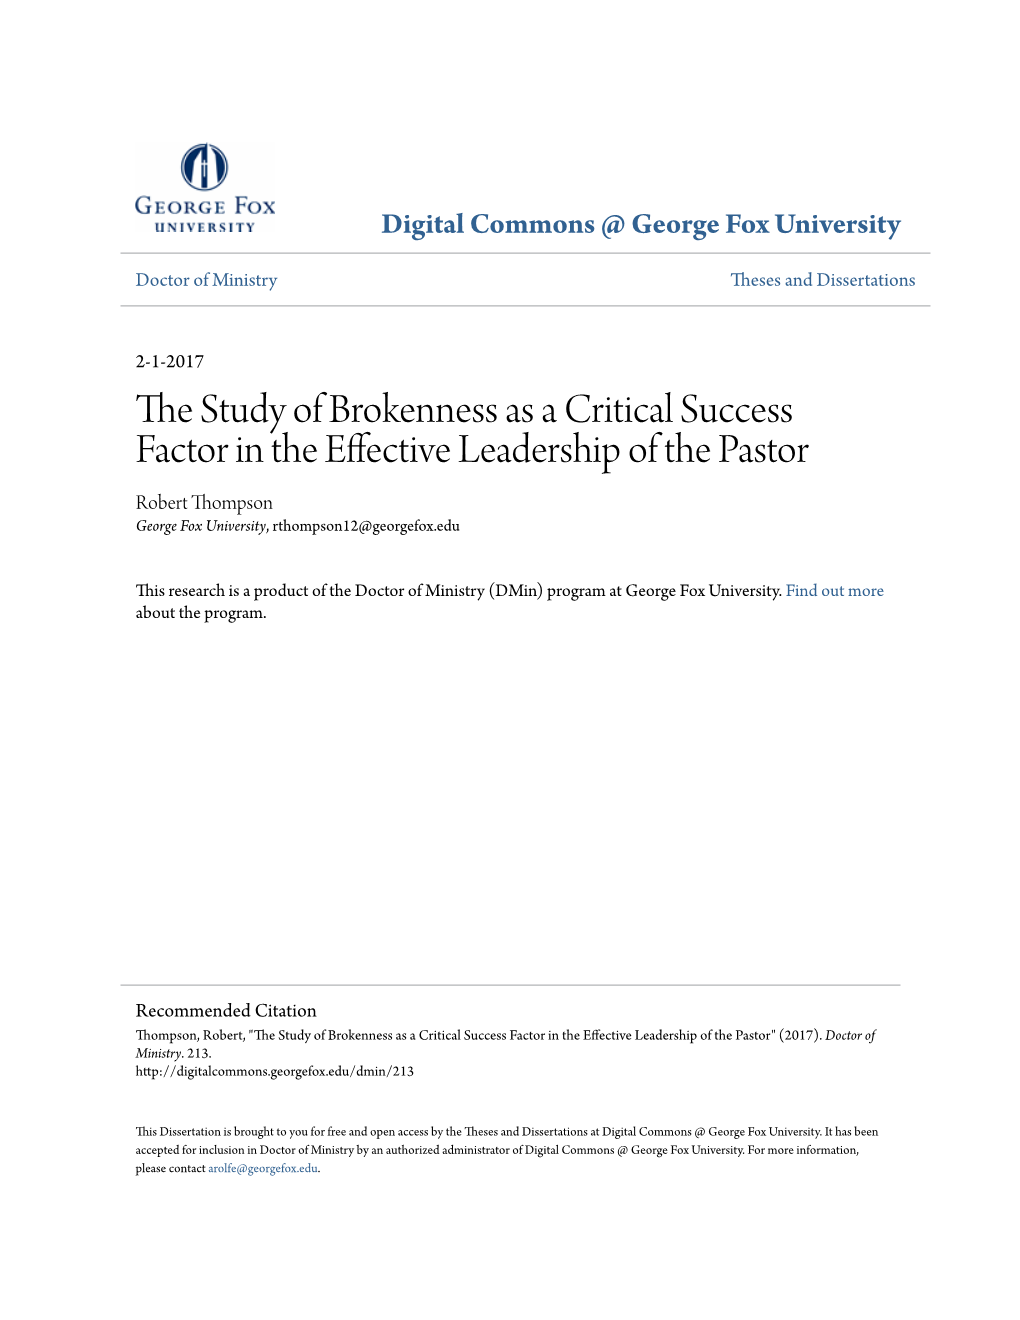 The Study of Brokenness As a Critical Success Factor in the Effective